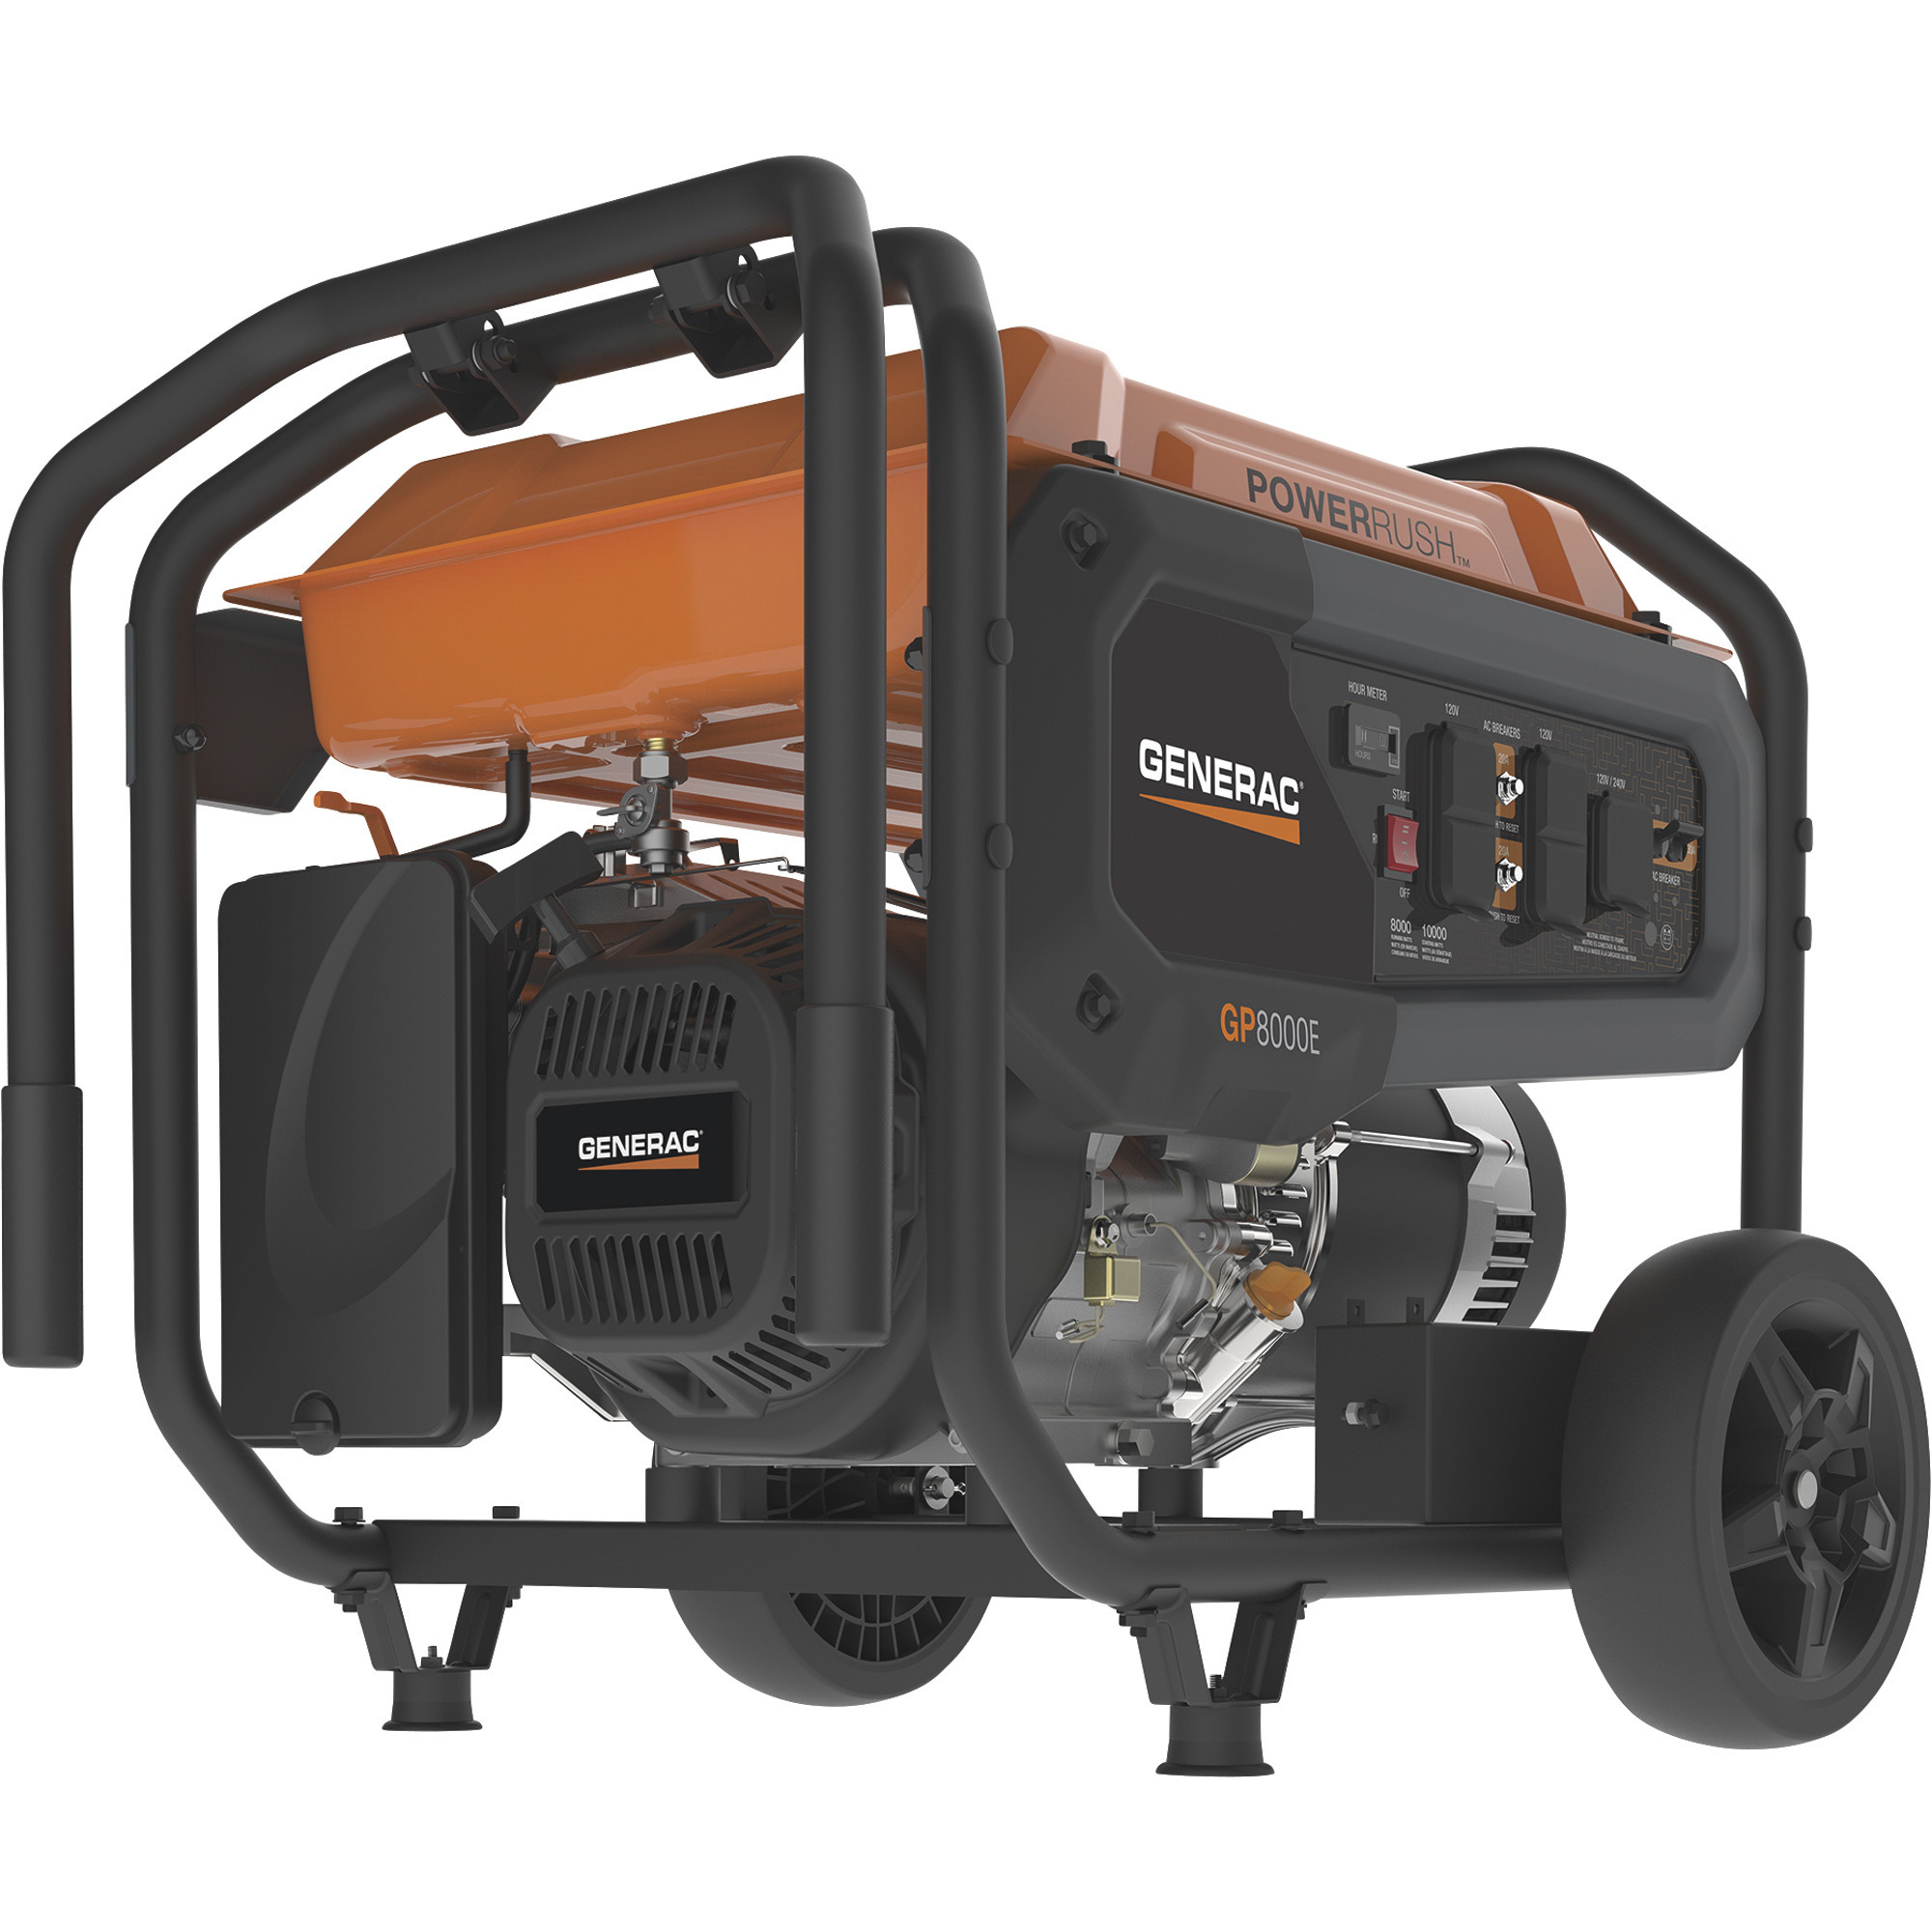 Generac Portable Generator, 10,000 Surge Watts, 8000 Rated Watts, Electric Start, CARB Compliant, Model 7676